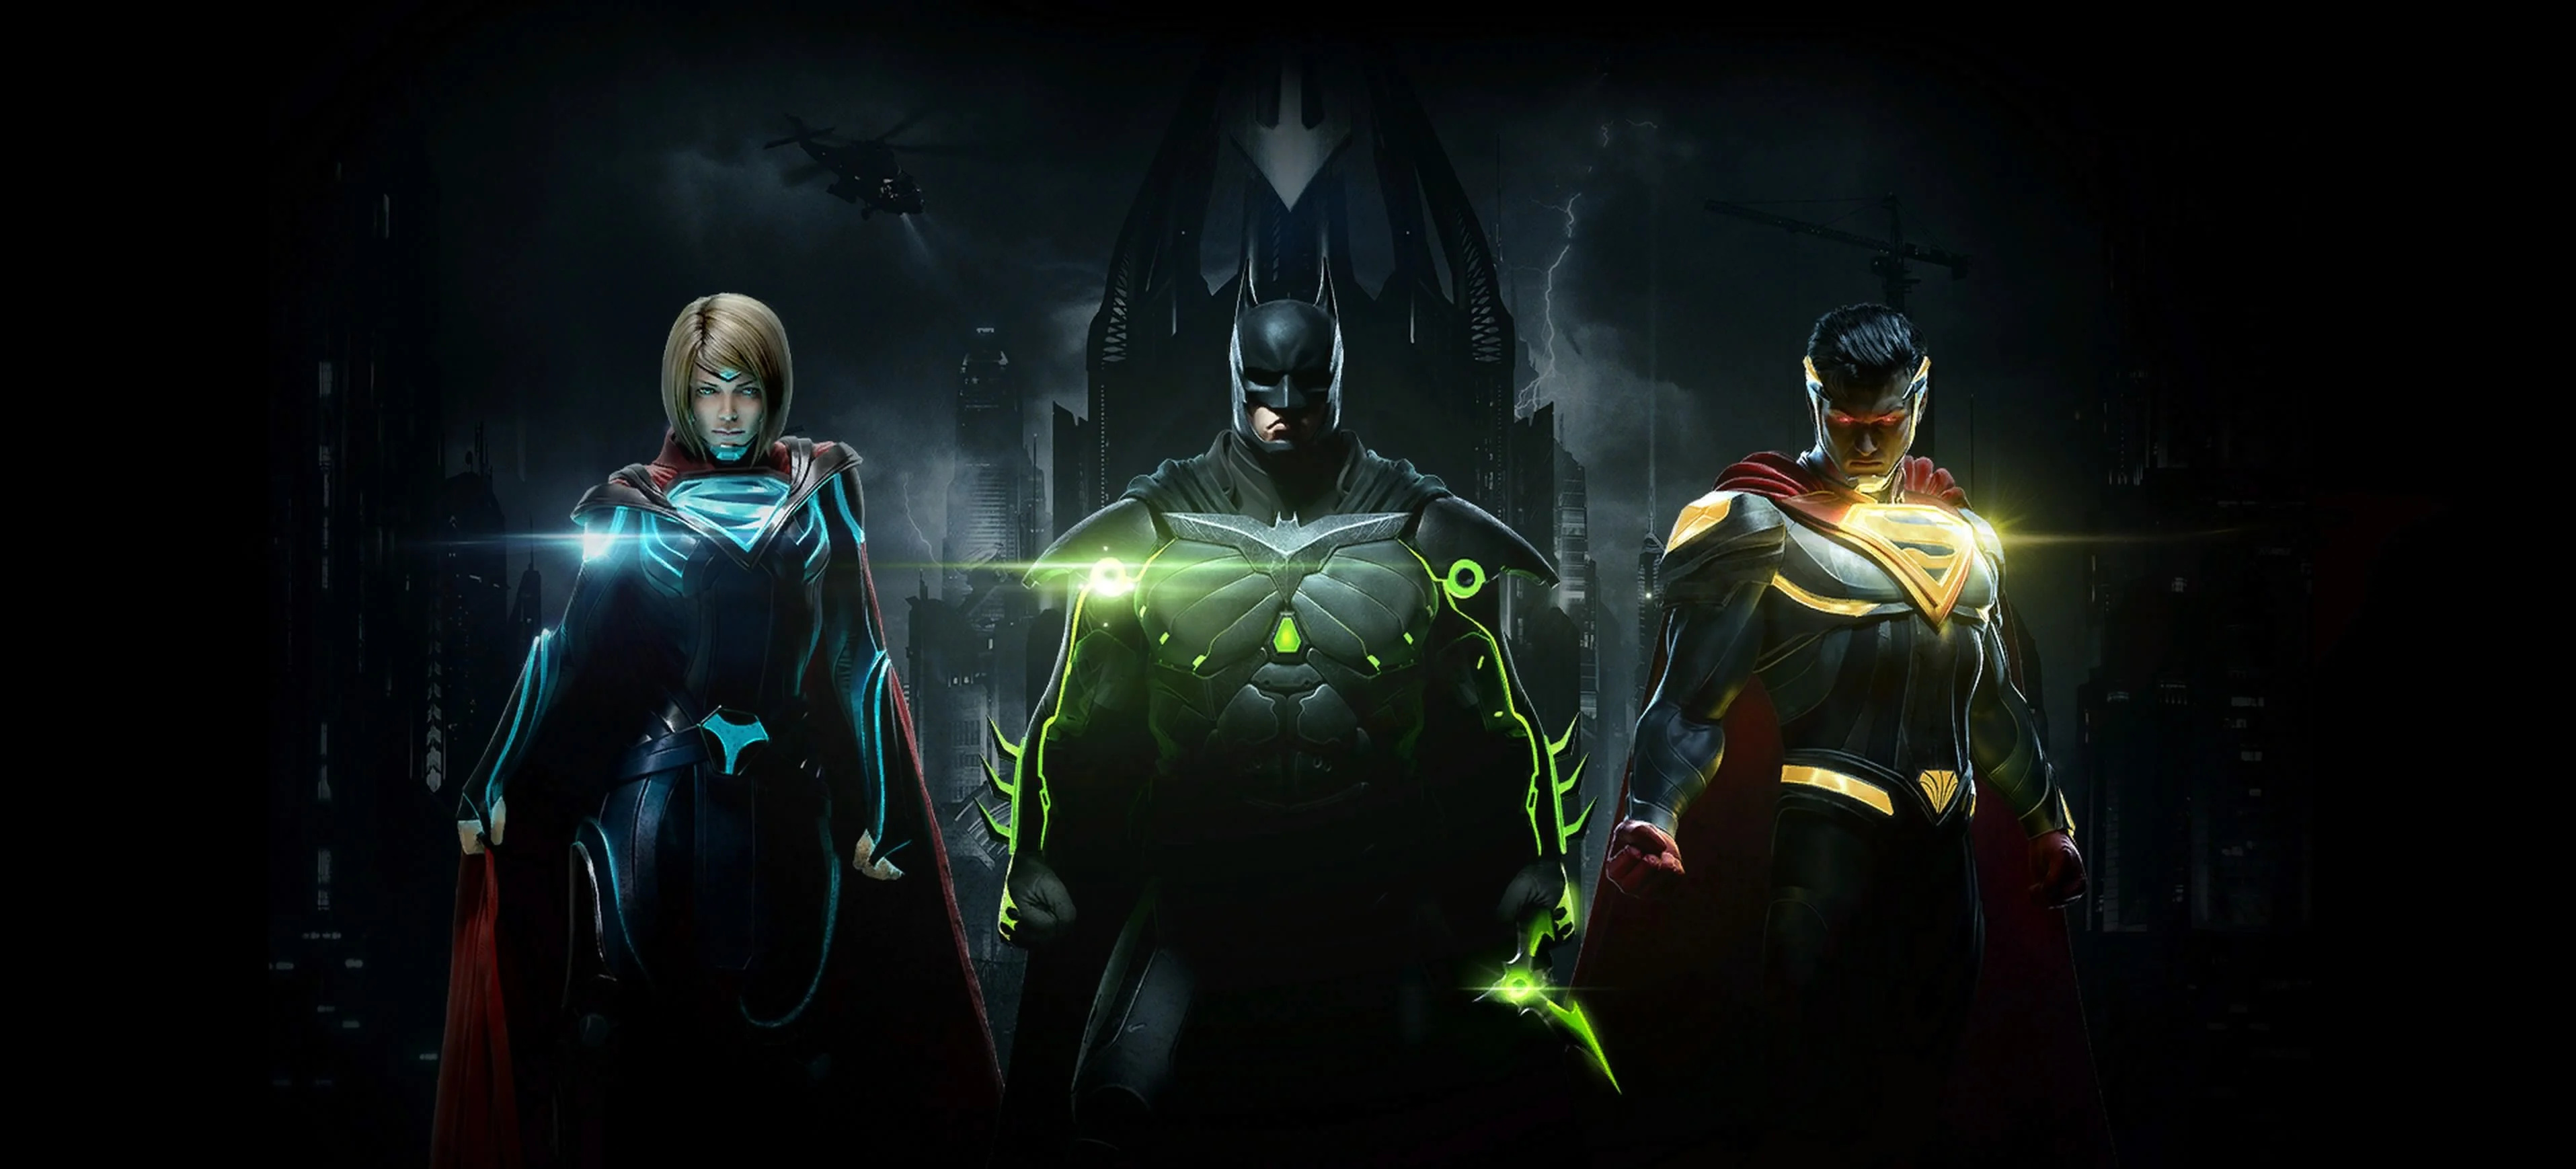 Injustice 2, Game news, Xbox Game Pass, Exciting updates, 3840x1740 Dual Screen Desktop